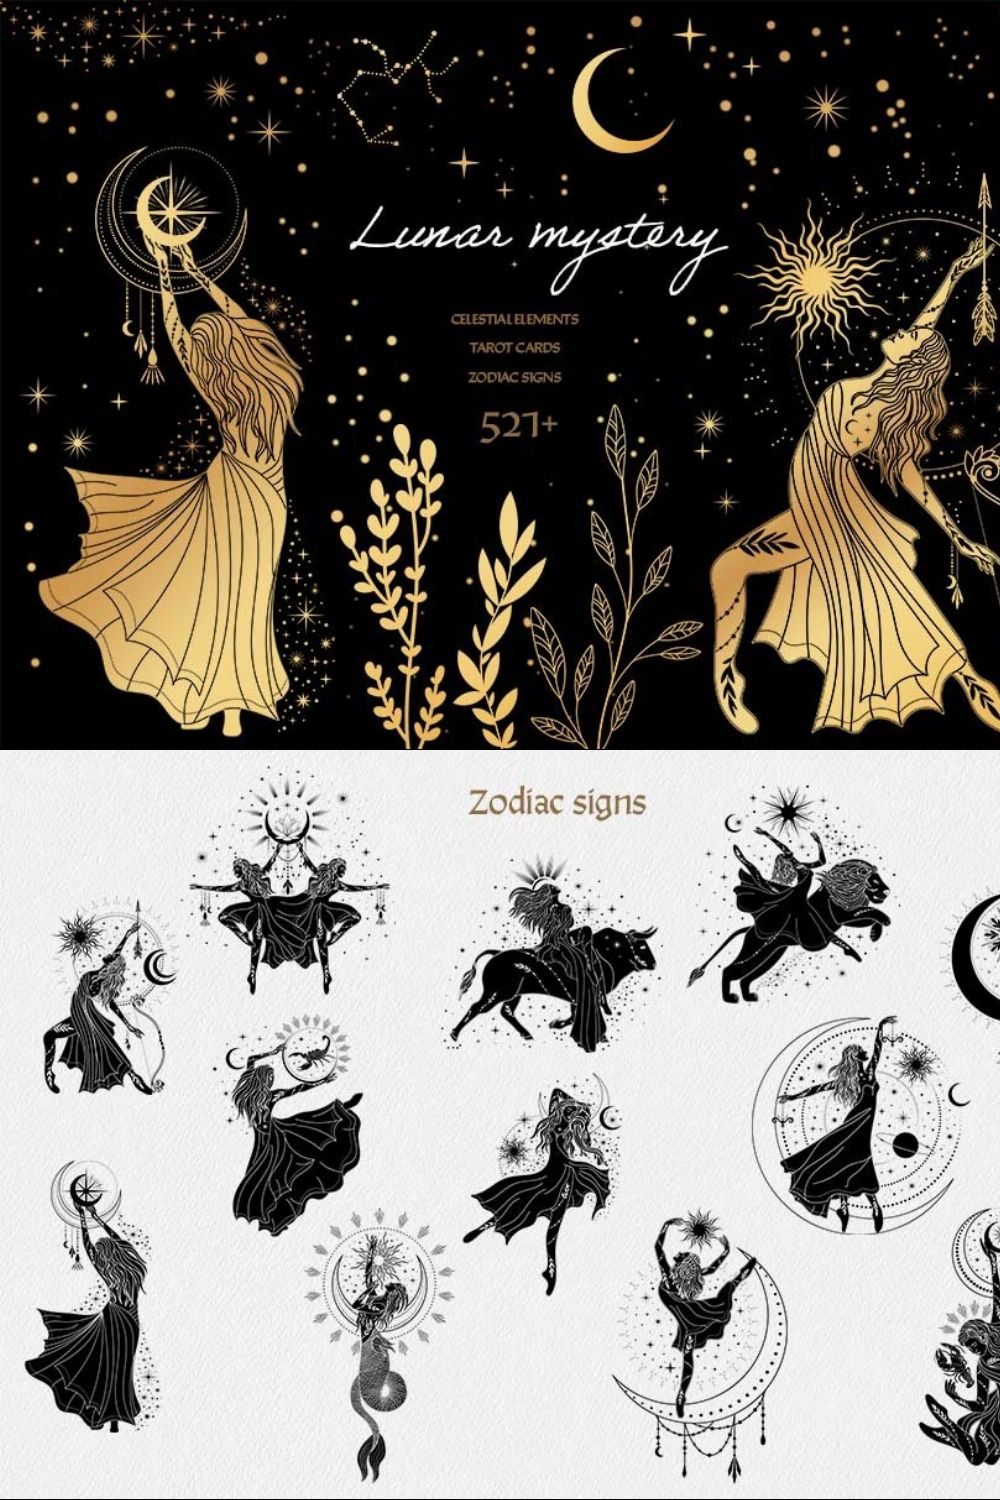 Lunar mystery pinterest preview image.